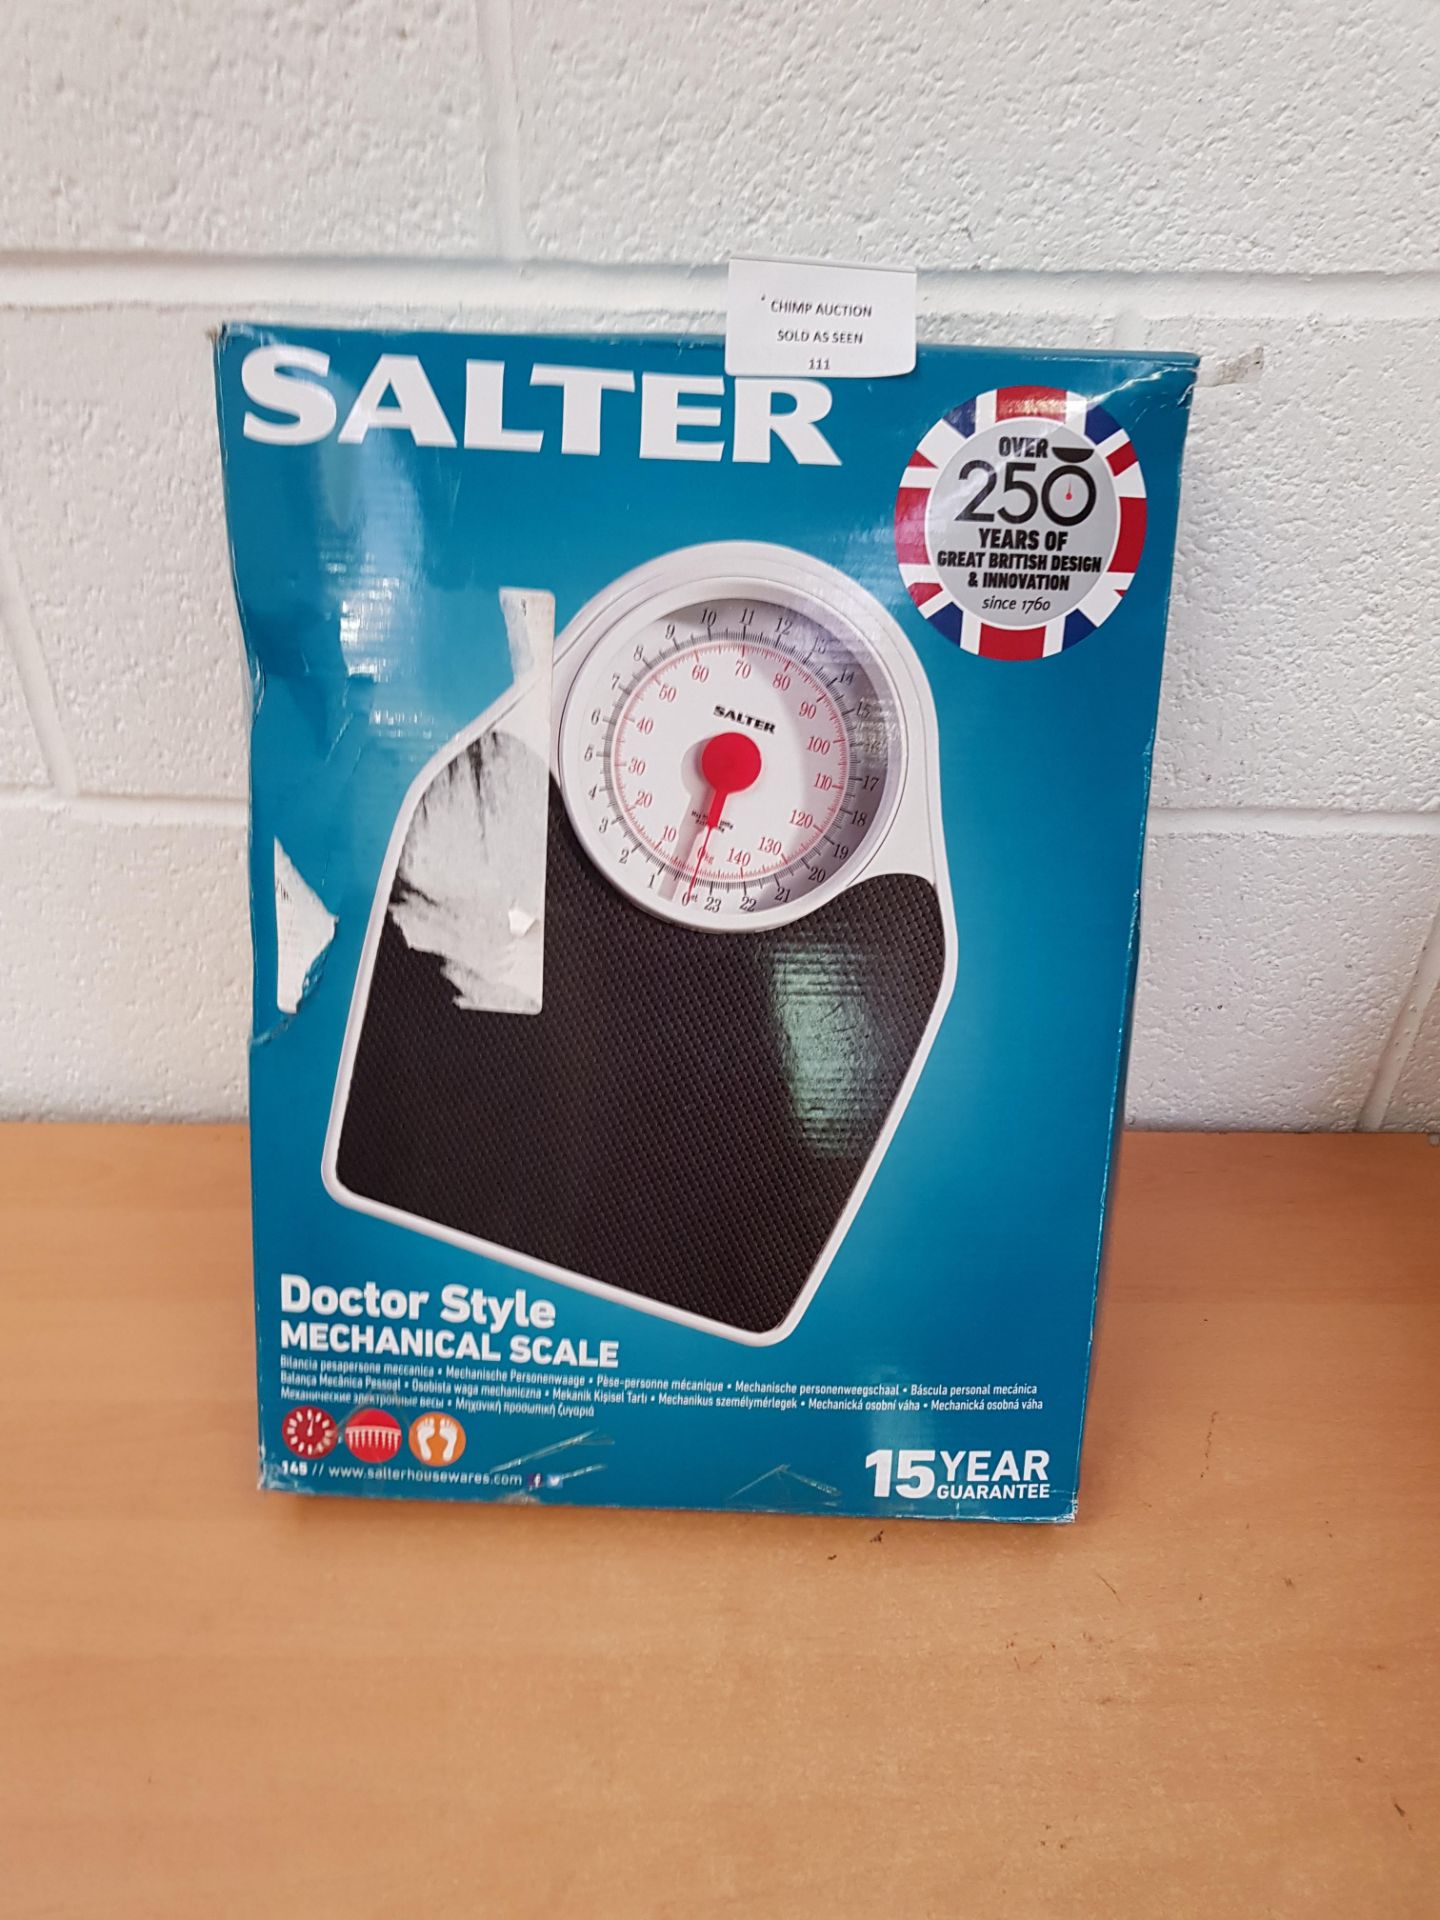 Salter Doctor Style Mechanical Scale